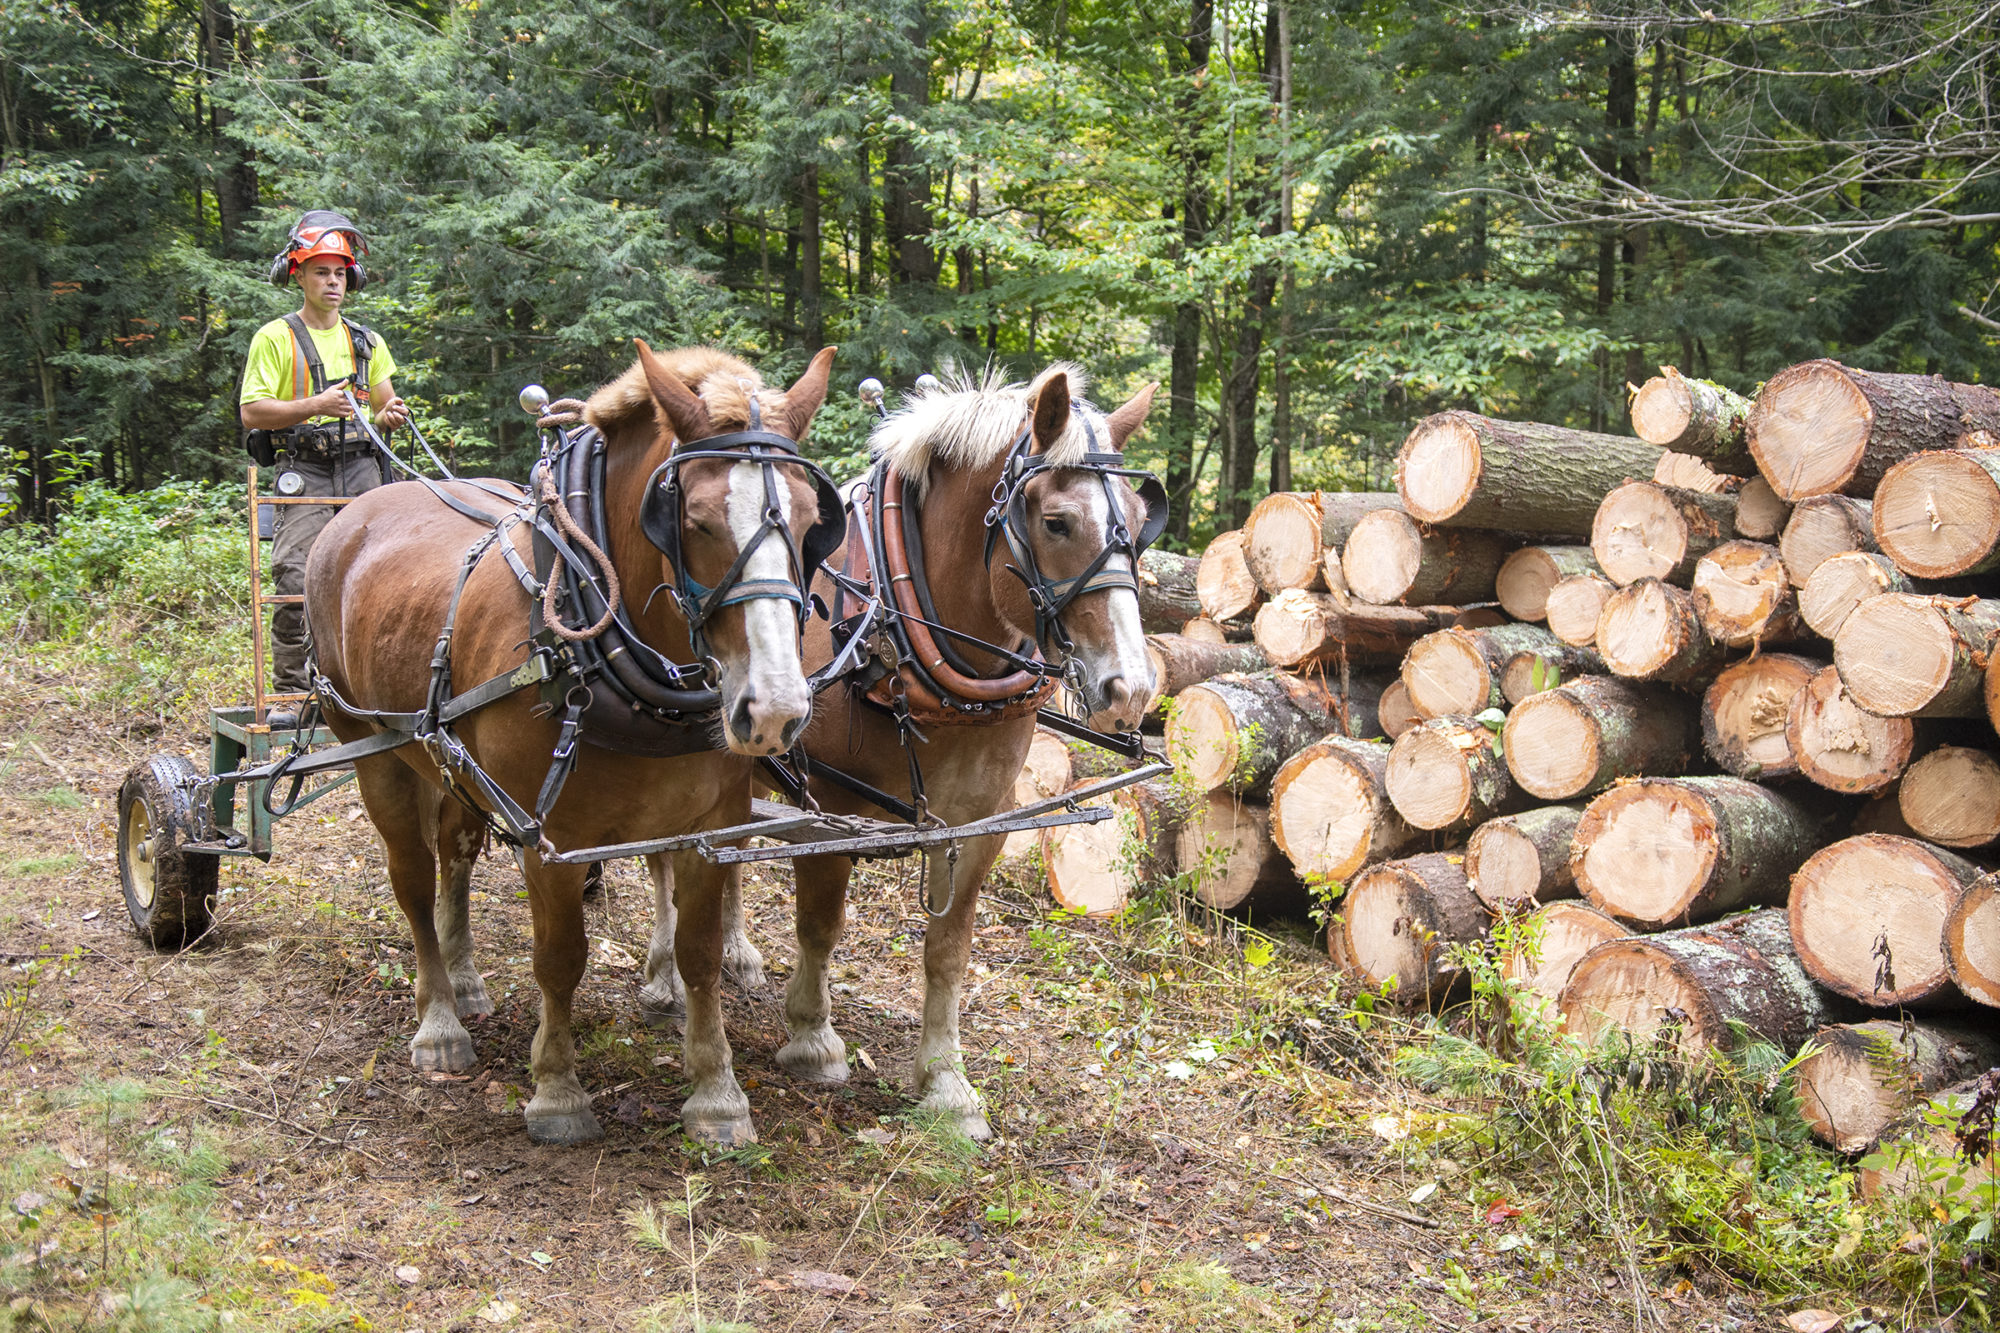 Derek O’Toole works at a site in Northfield with his horses. O’Toole and Johnson co-founded Third Branch Logging in 2018 because they believe there is a market in Vermont for low-impact logging that emphasizes forest ecology over speed or volume. Photo by Erica Houskeeper.